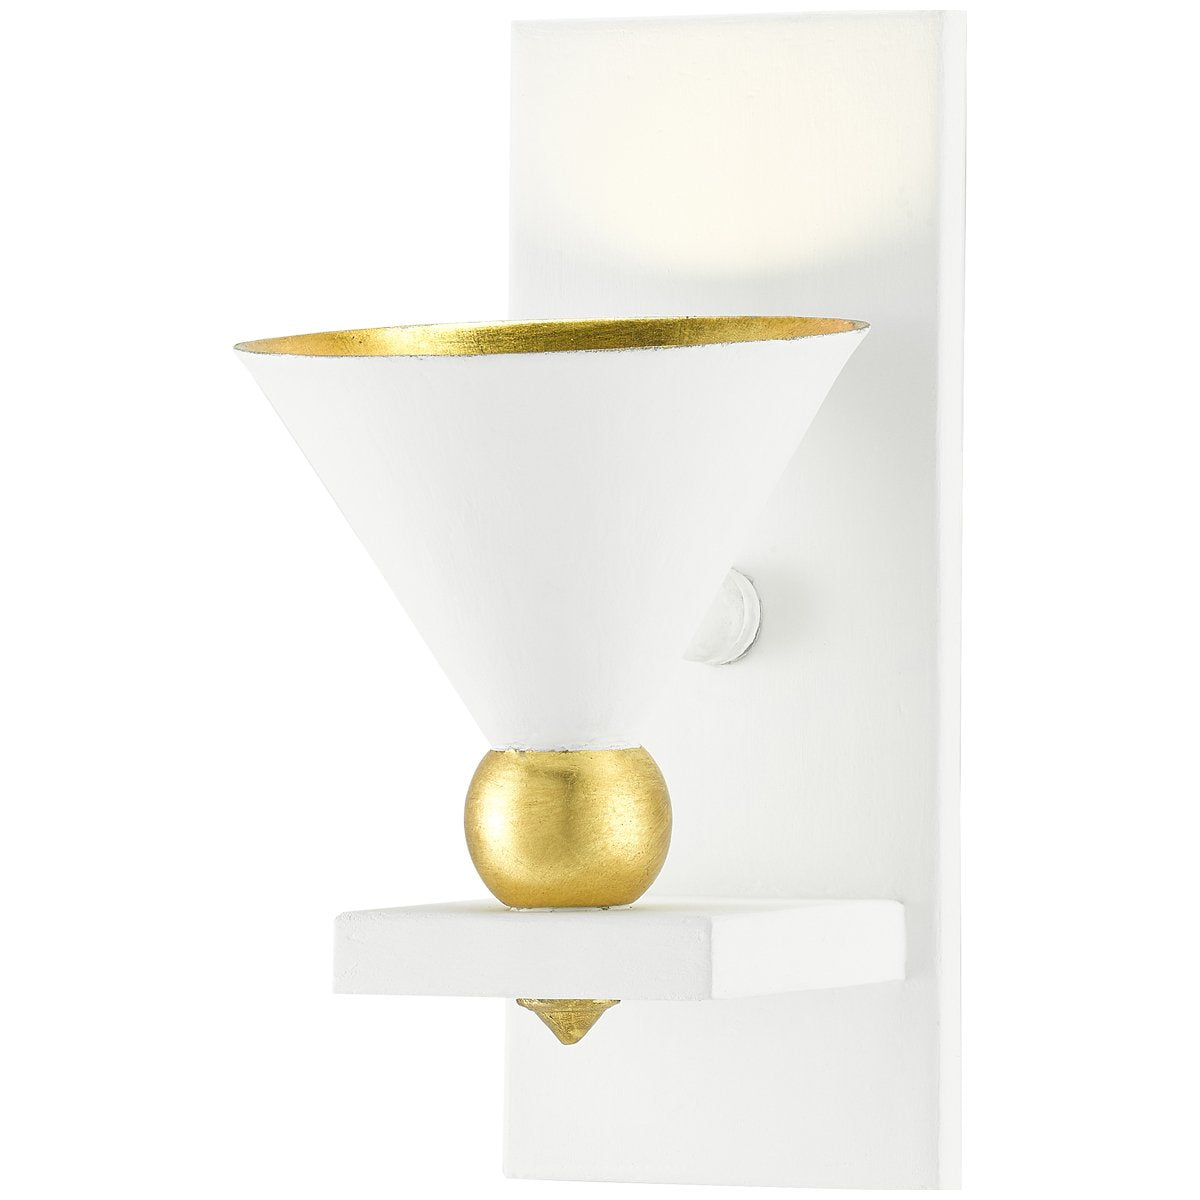 Currey and Company Moderne Wall Sconce